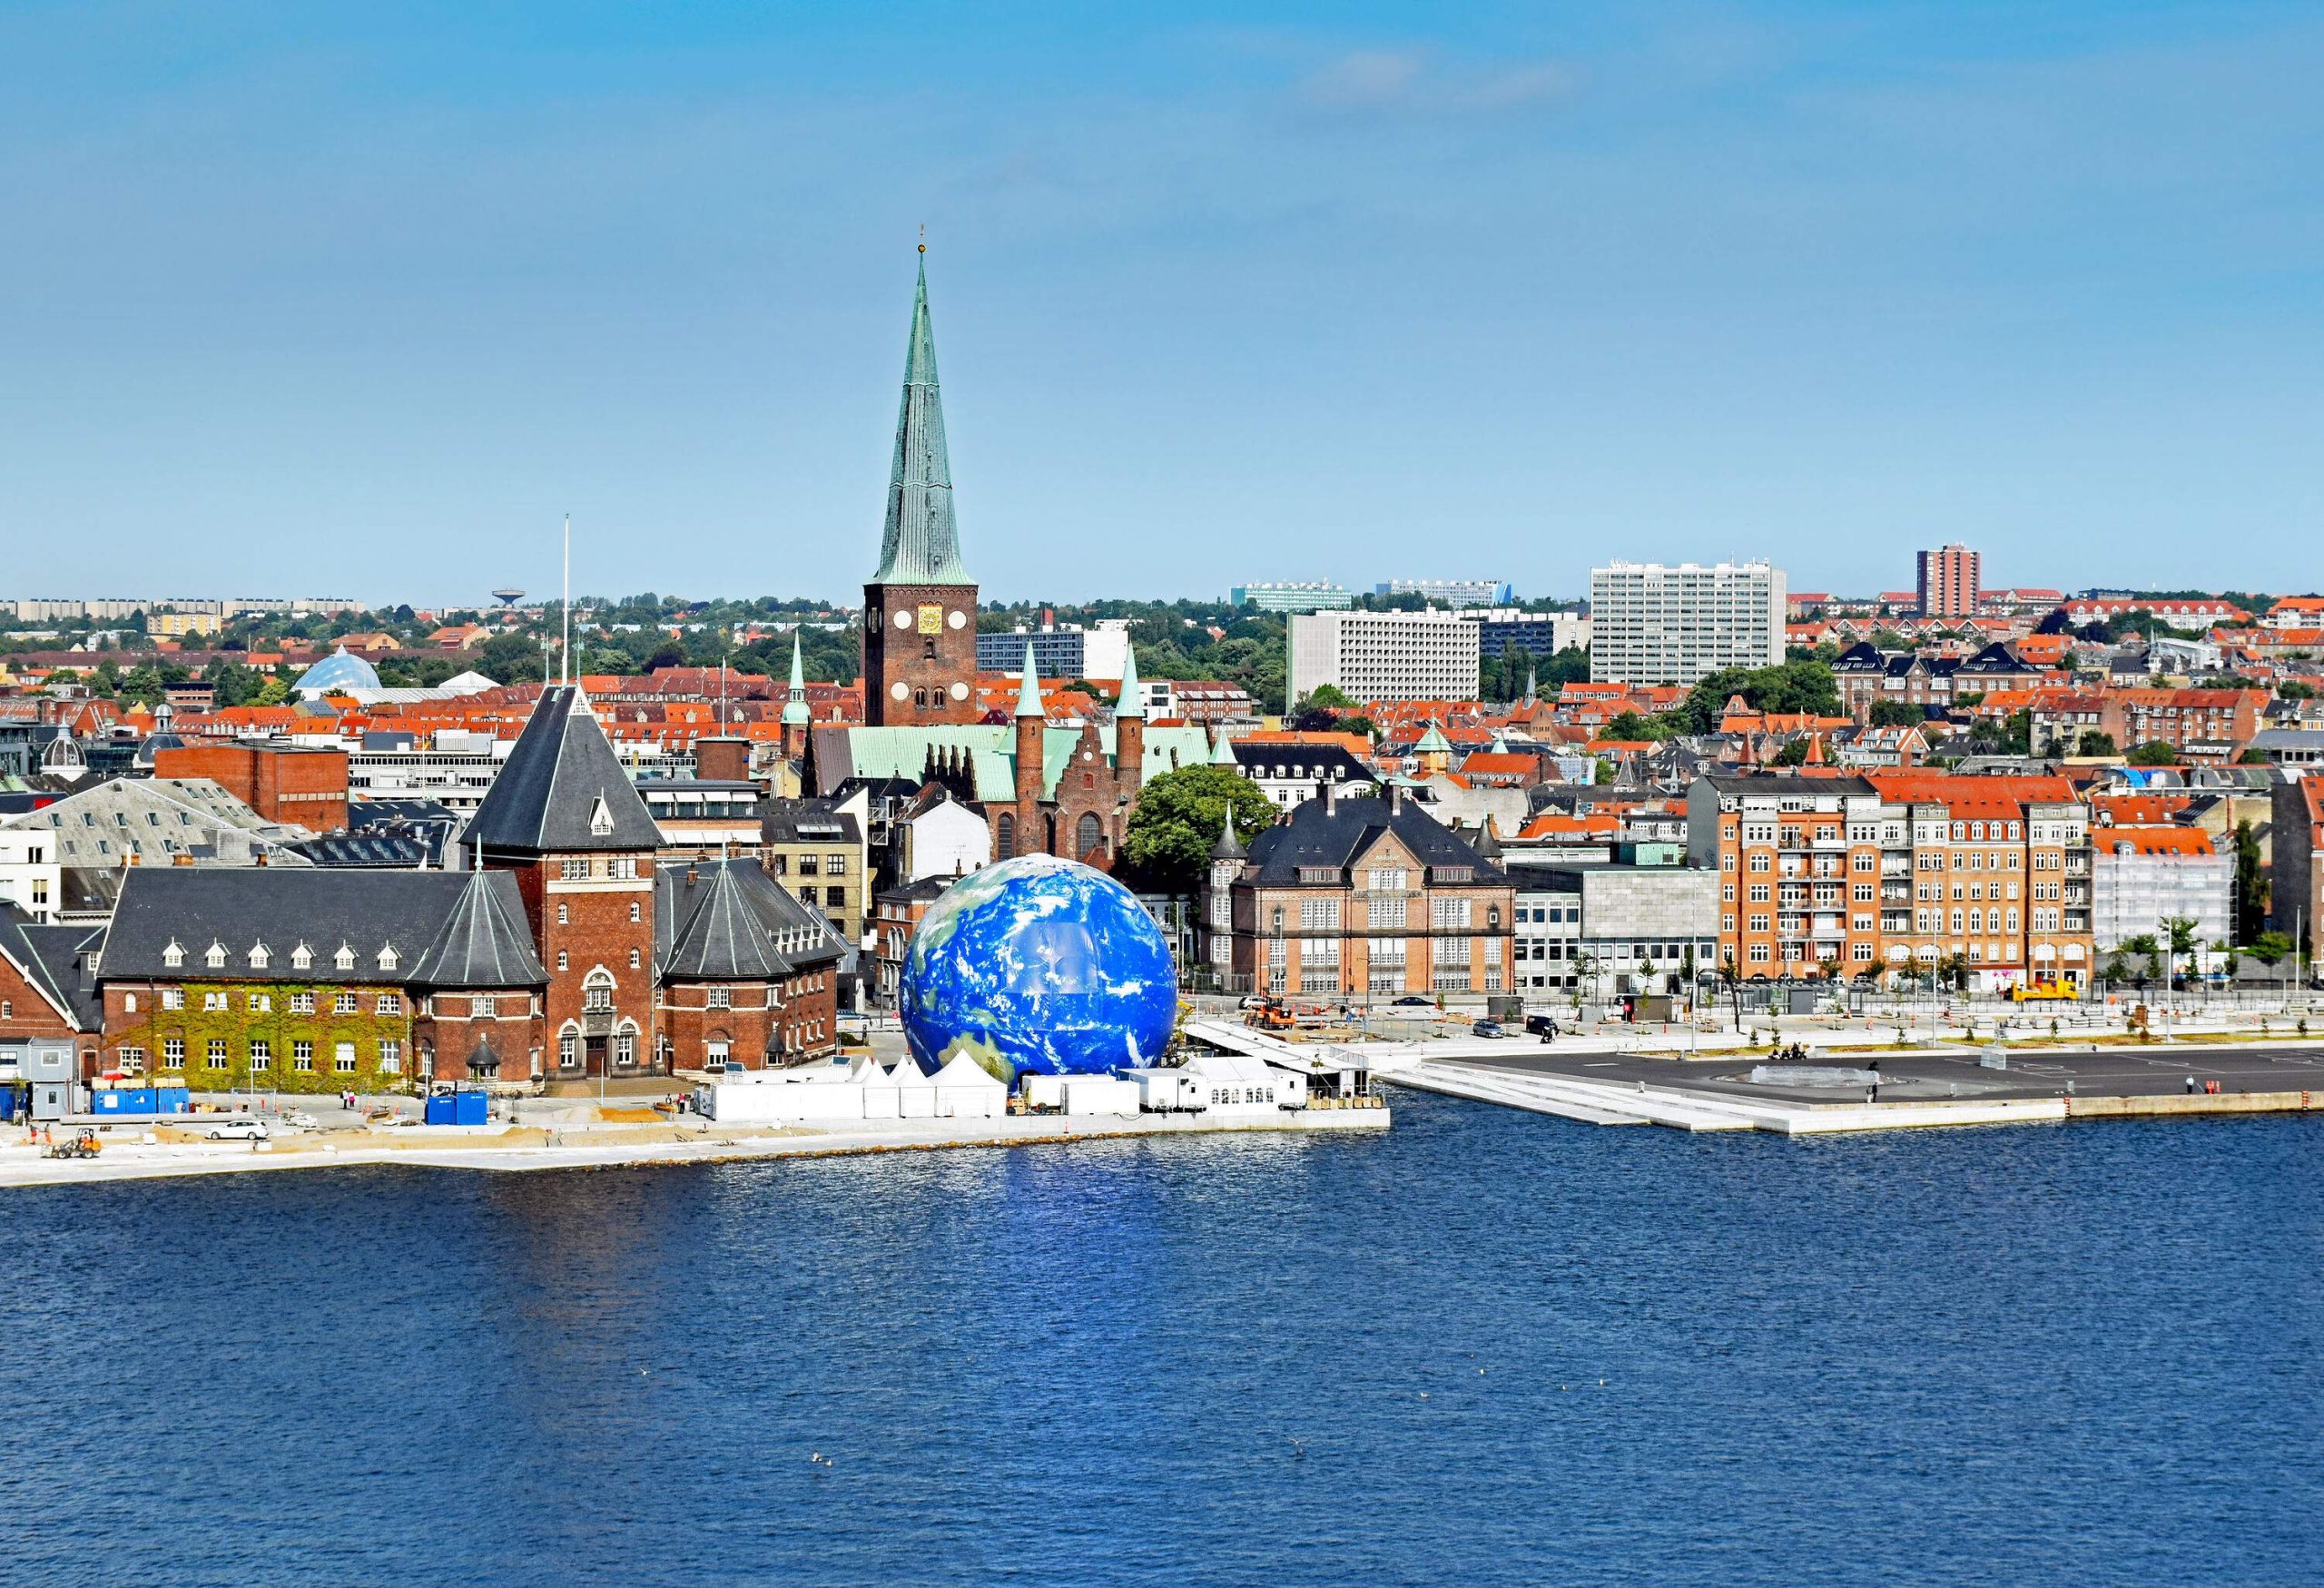 The remarkable city of Aarhus filled with iconic structures seen from across the harbour.